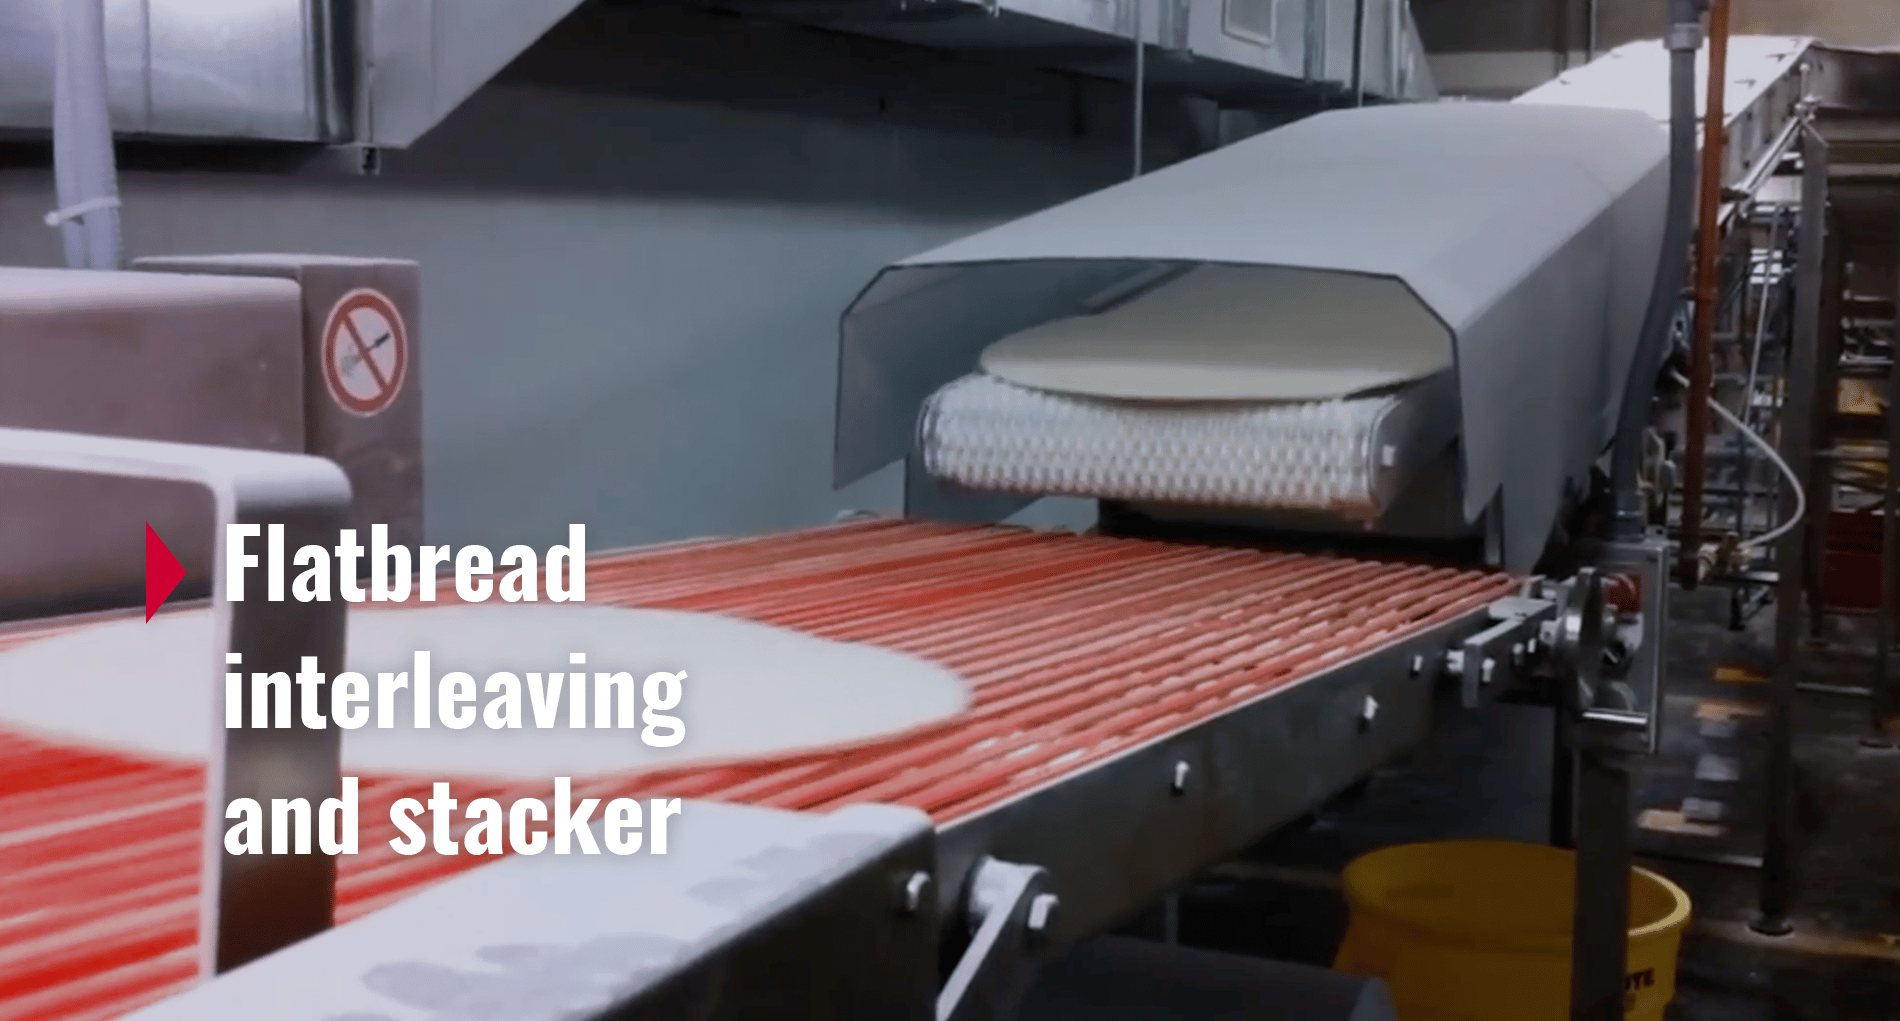 Flatbread interleaving and stacking cover image